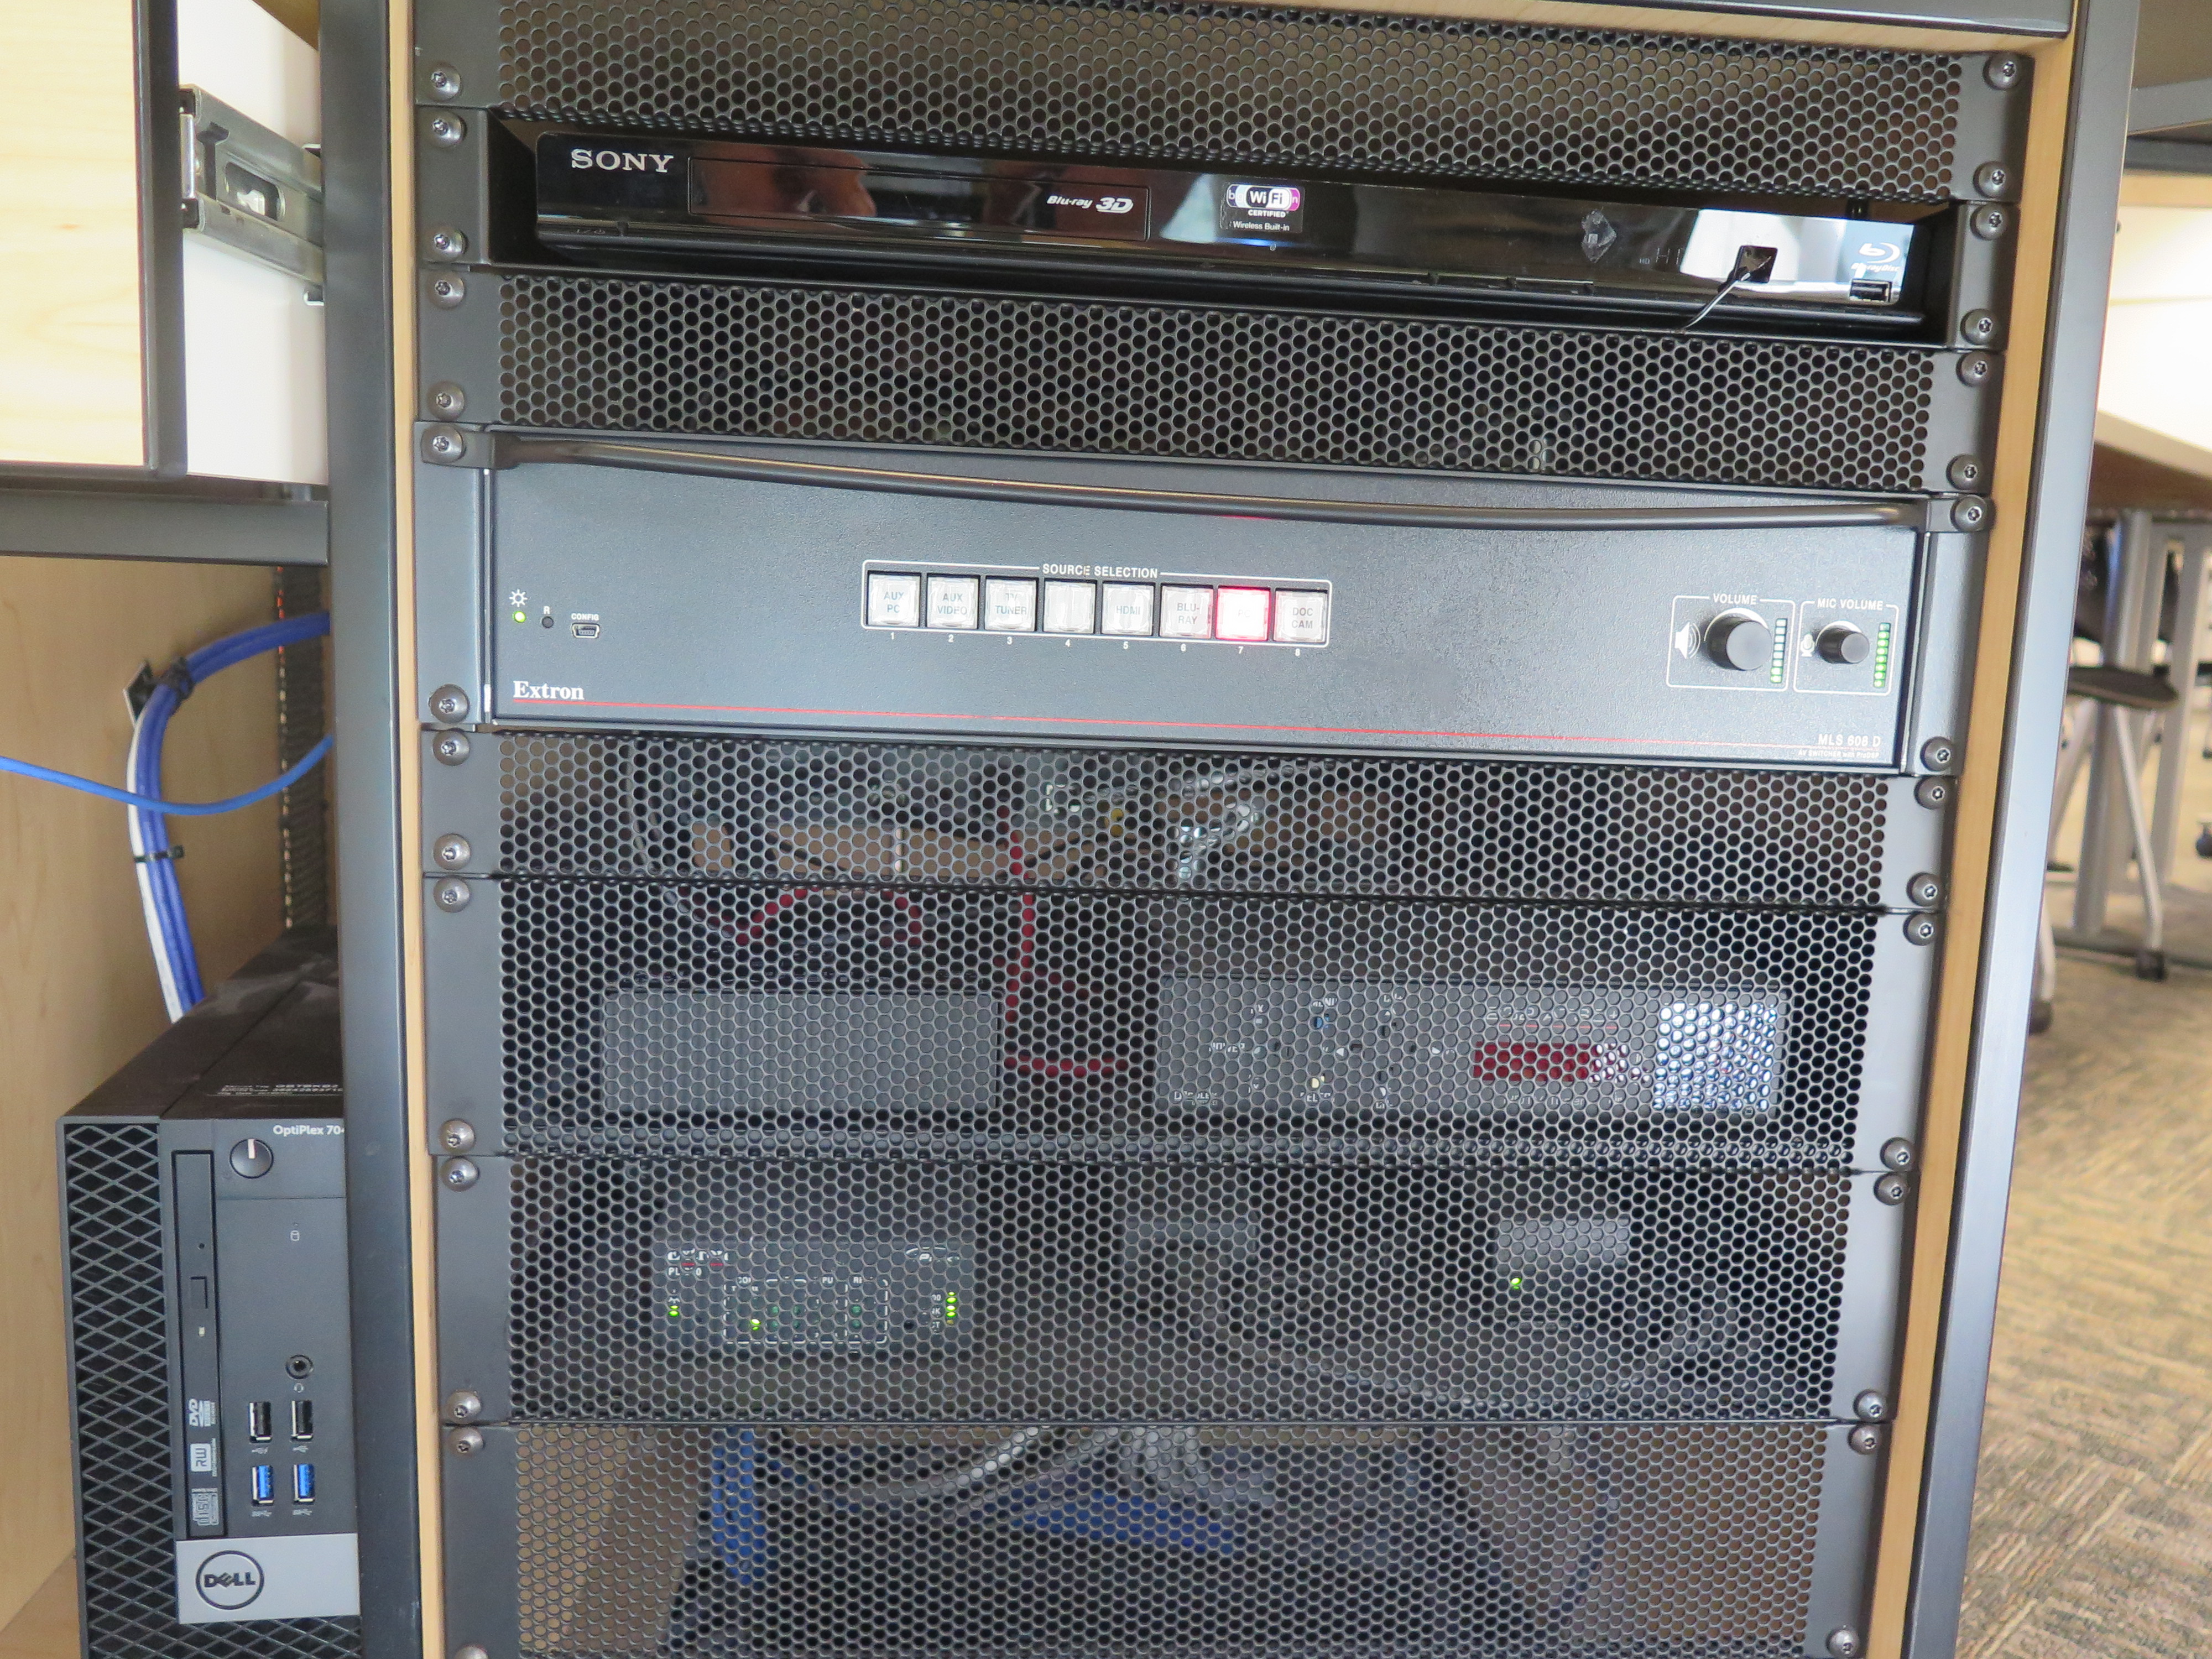 Front of Equipment rack showing a Blue-Ray/DVD Player, below that is the AV Switcher, and to the left is the compartment with the Dell Computer CPU.